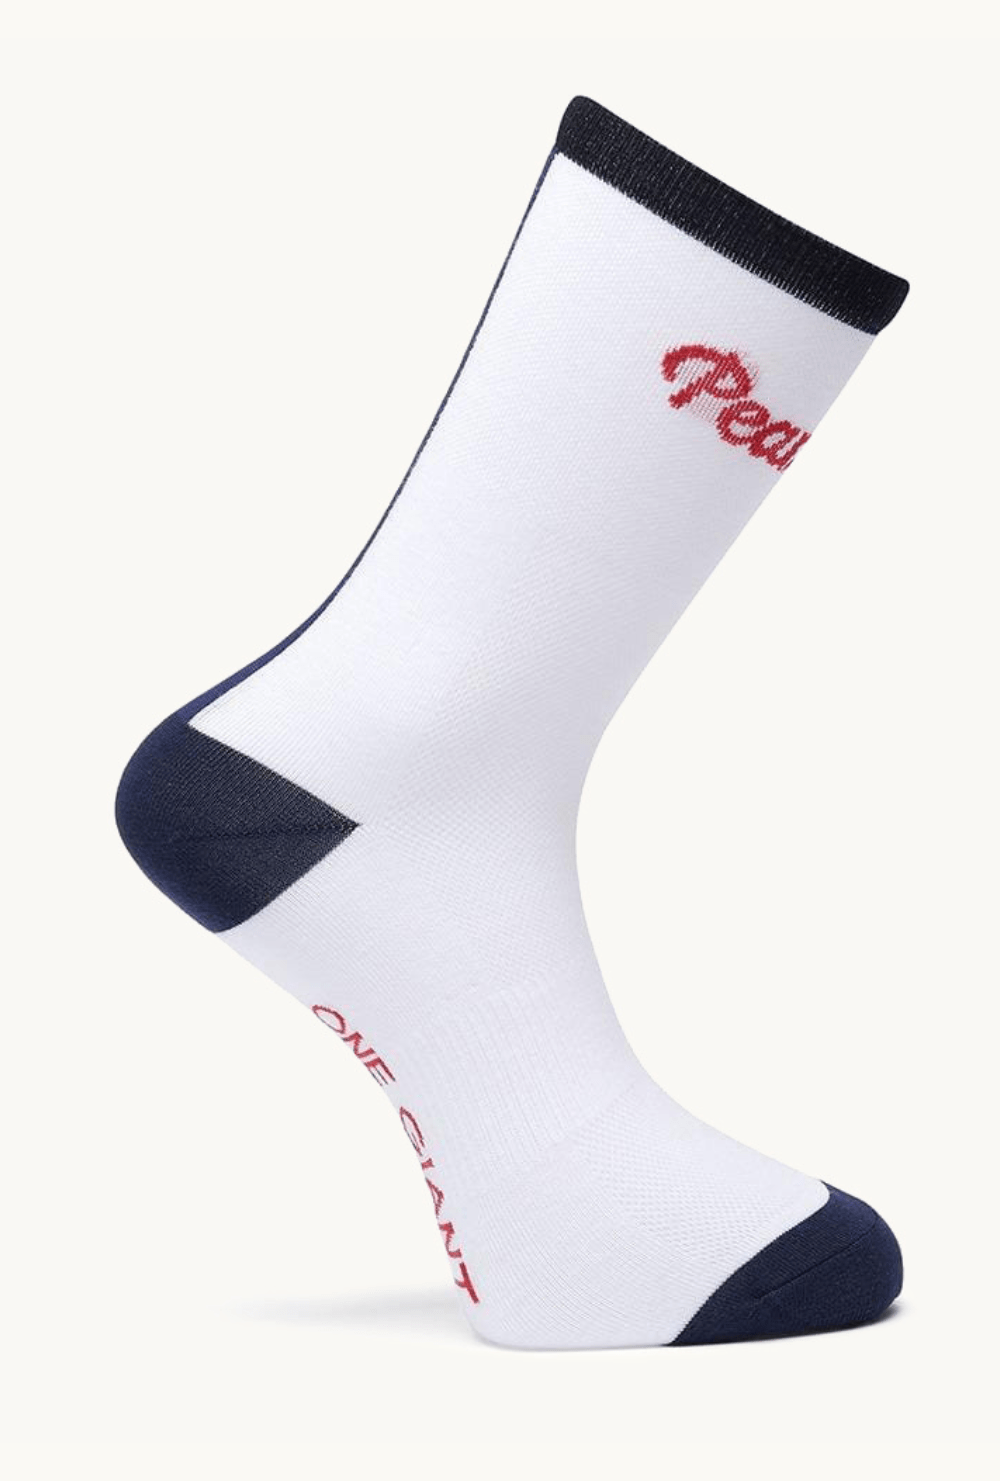 Pearson 1860  One Small Step One Giant Leap - Socks  L/xl